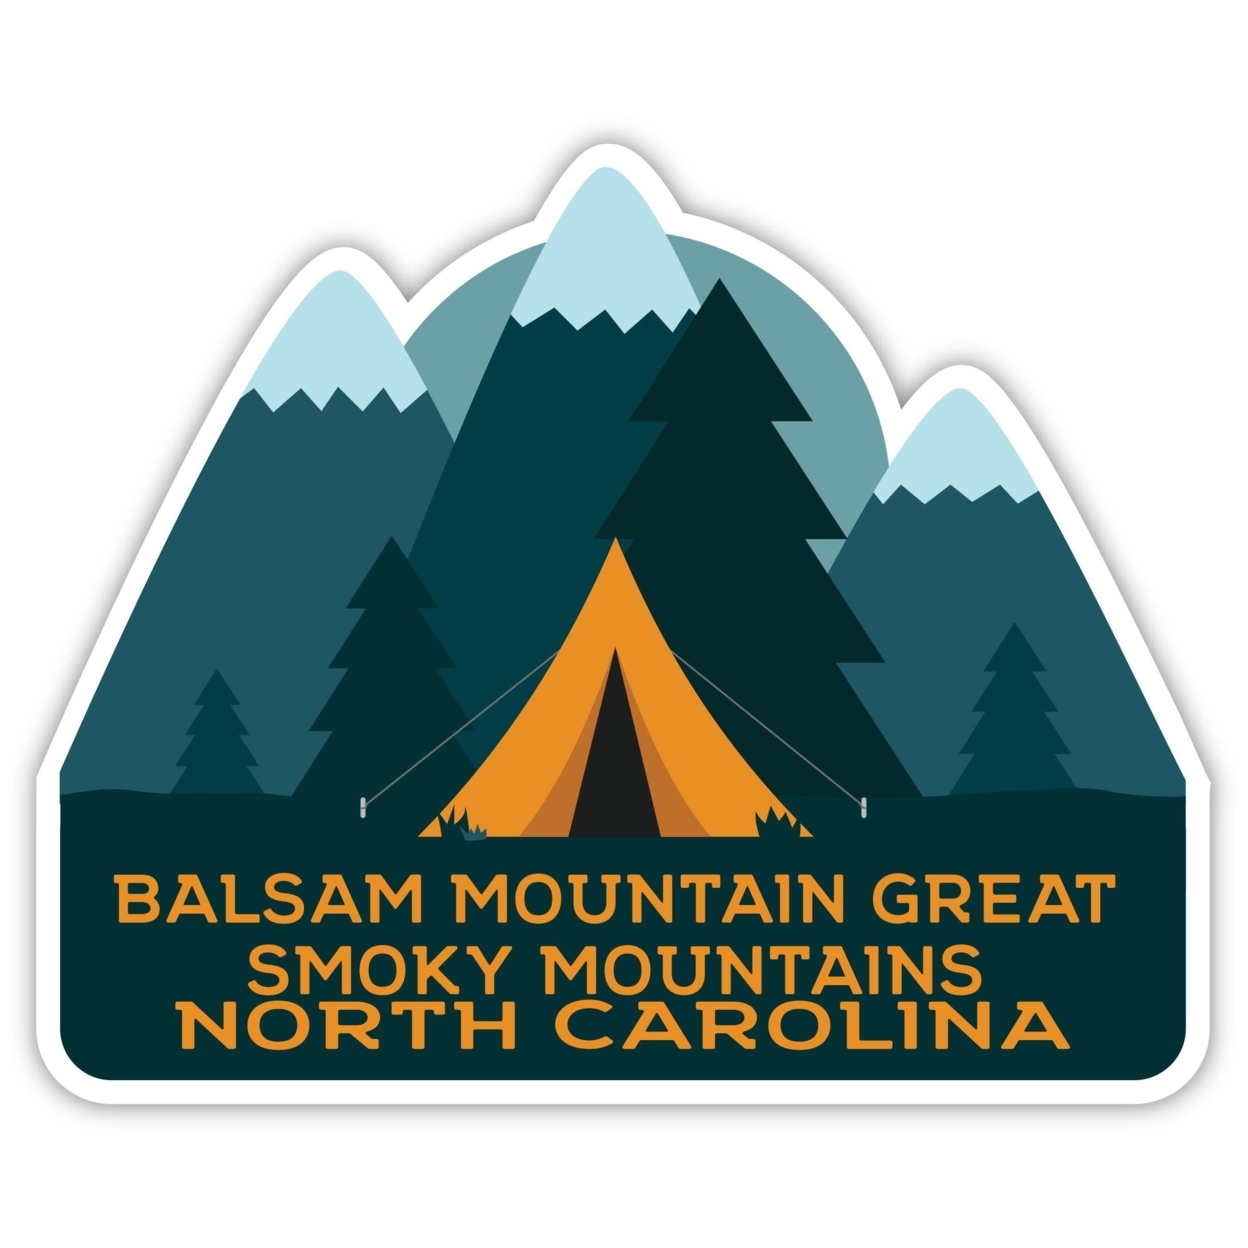 Balsam Mountain Great Smoky Mountains North Carolina Souvenir Decorative Stickers (Choose Theme And Size) - 4-Pack, 10-Inch, Tent